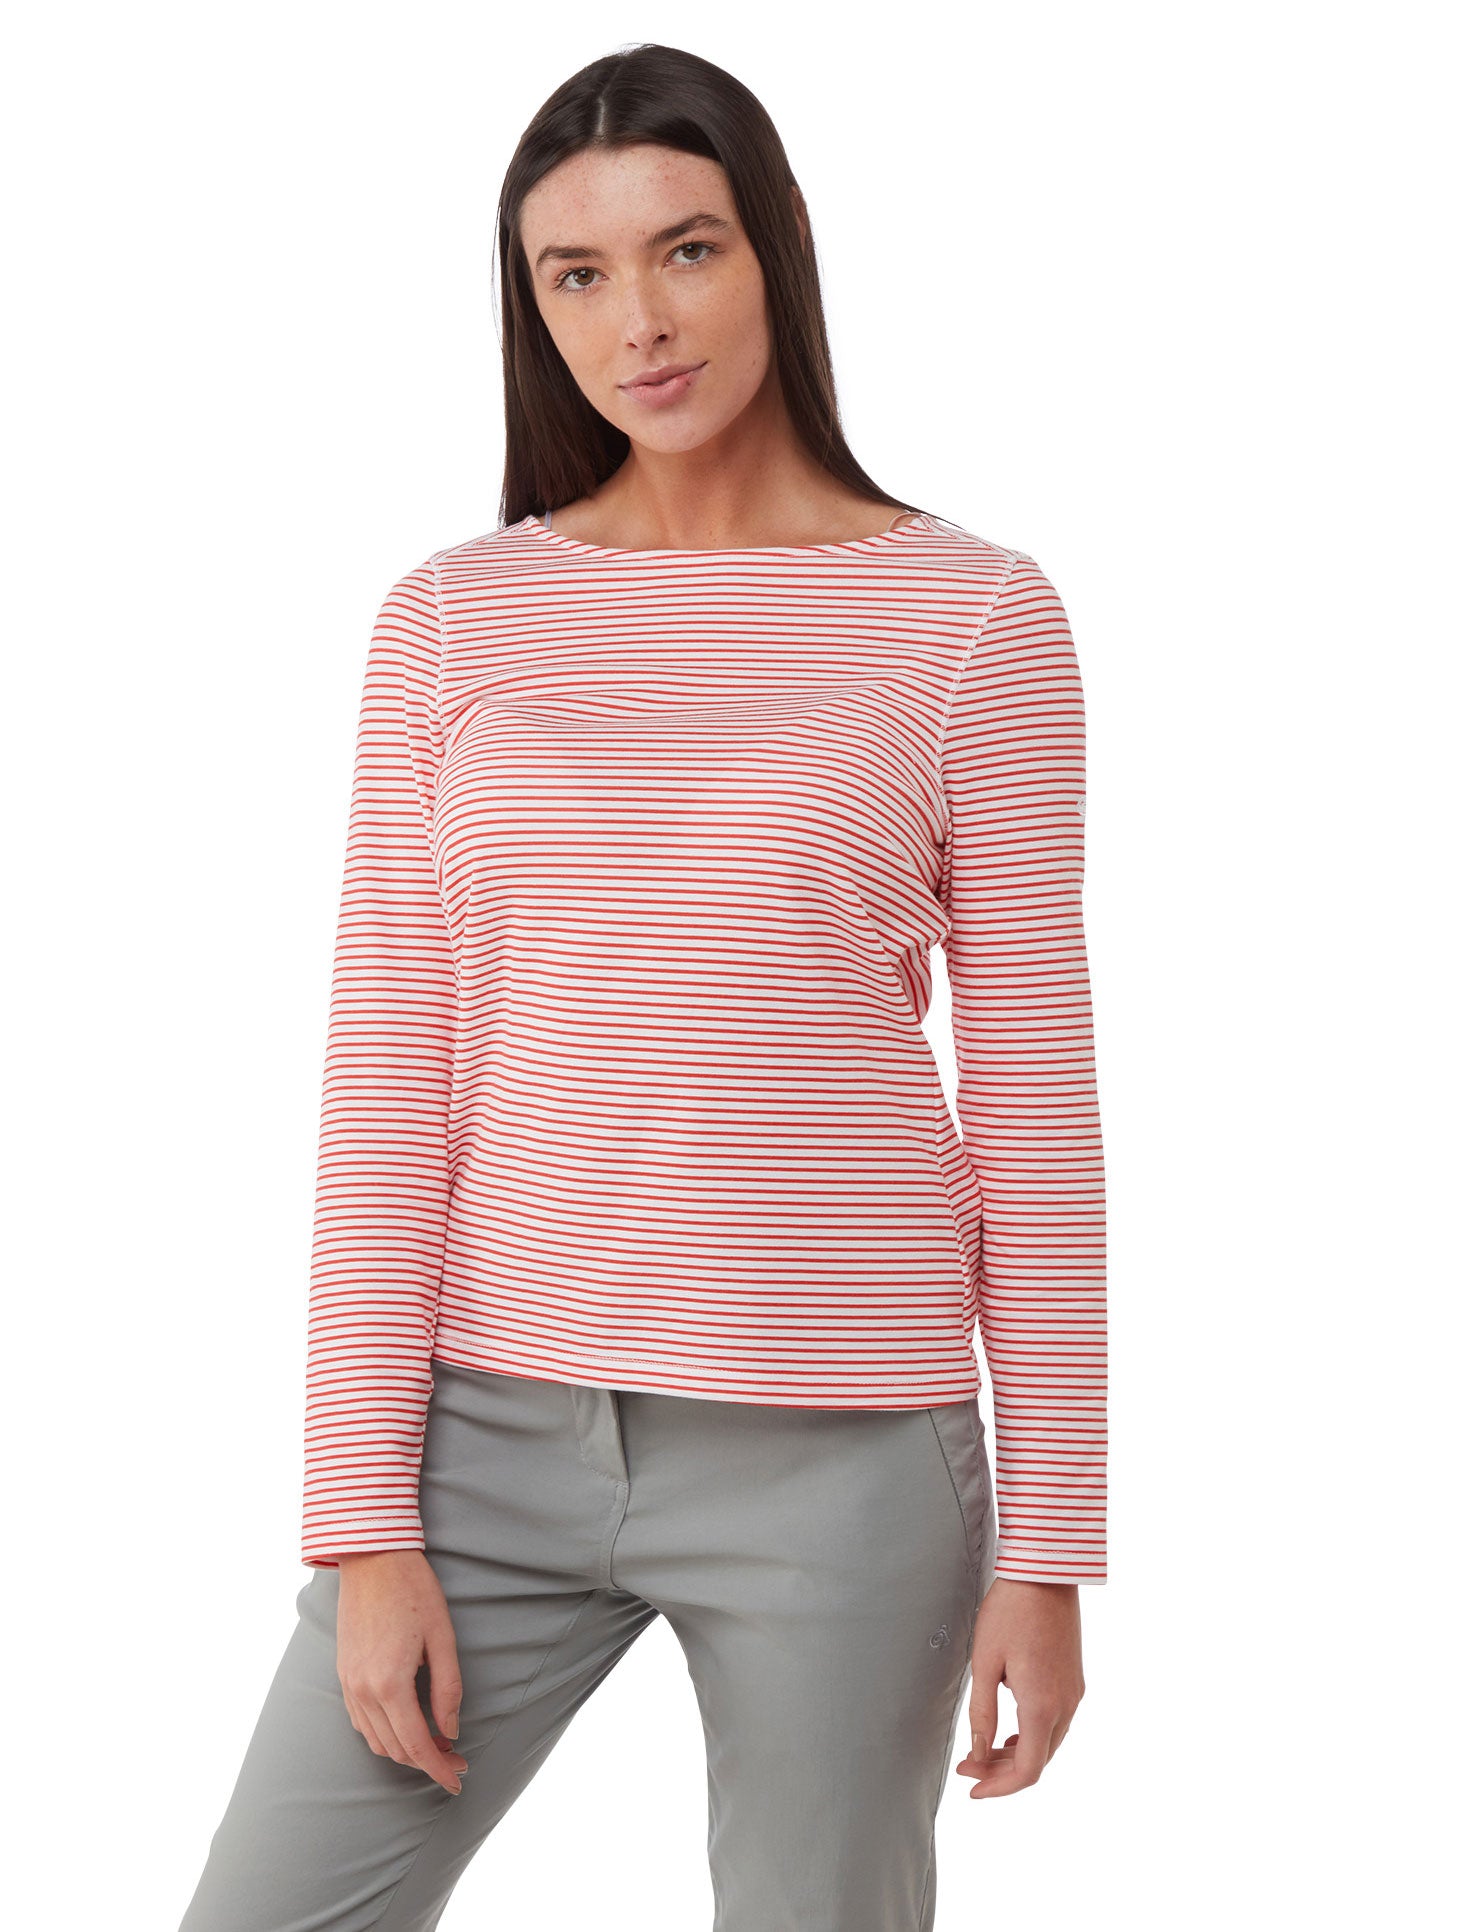 Rio Red Stripe Ladies NosiLife Erin Long Sleeve Top by Craghoppers